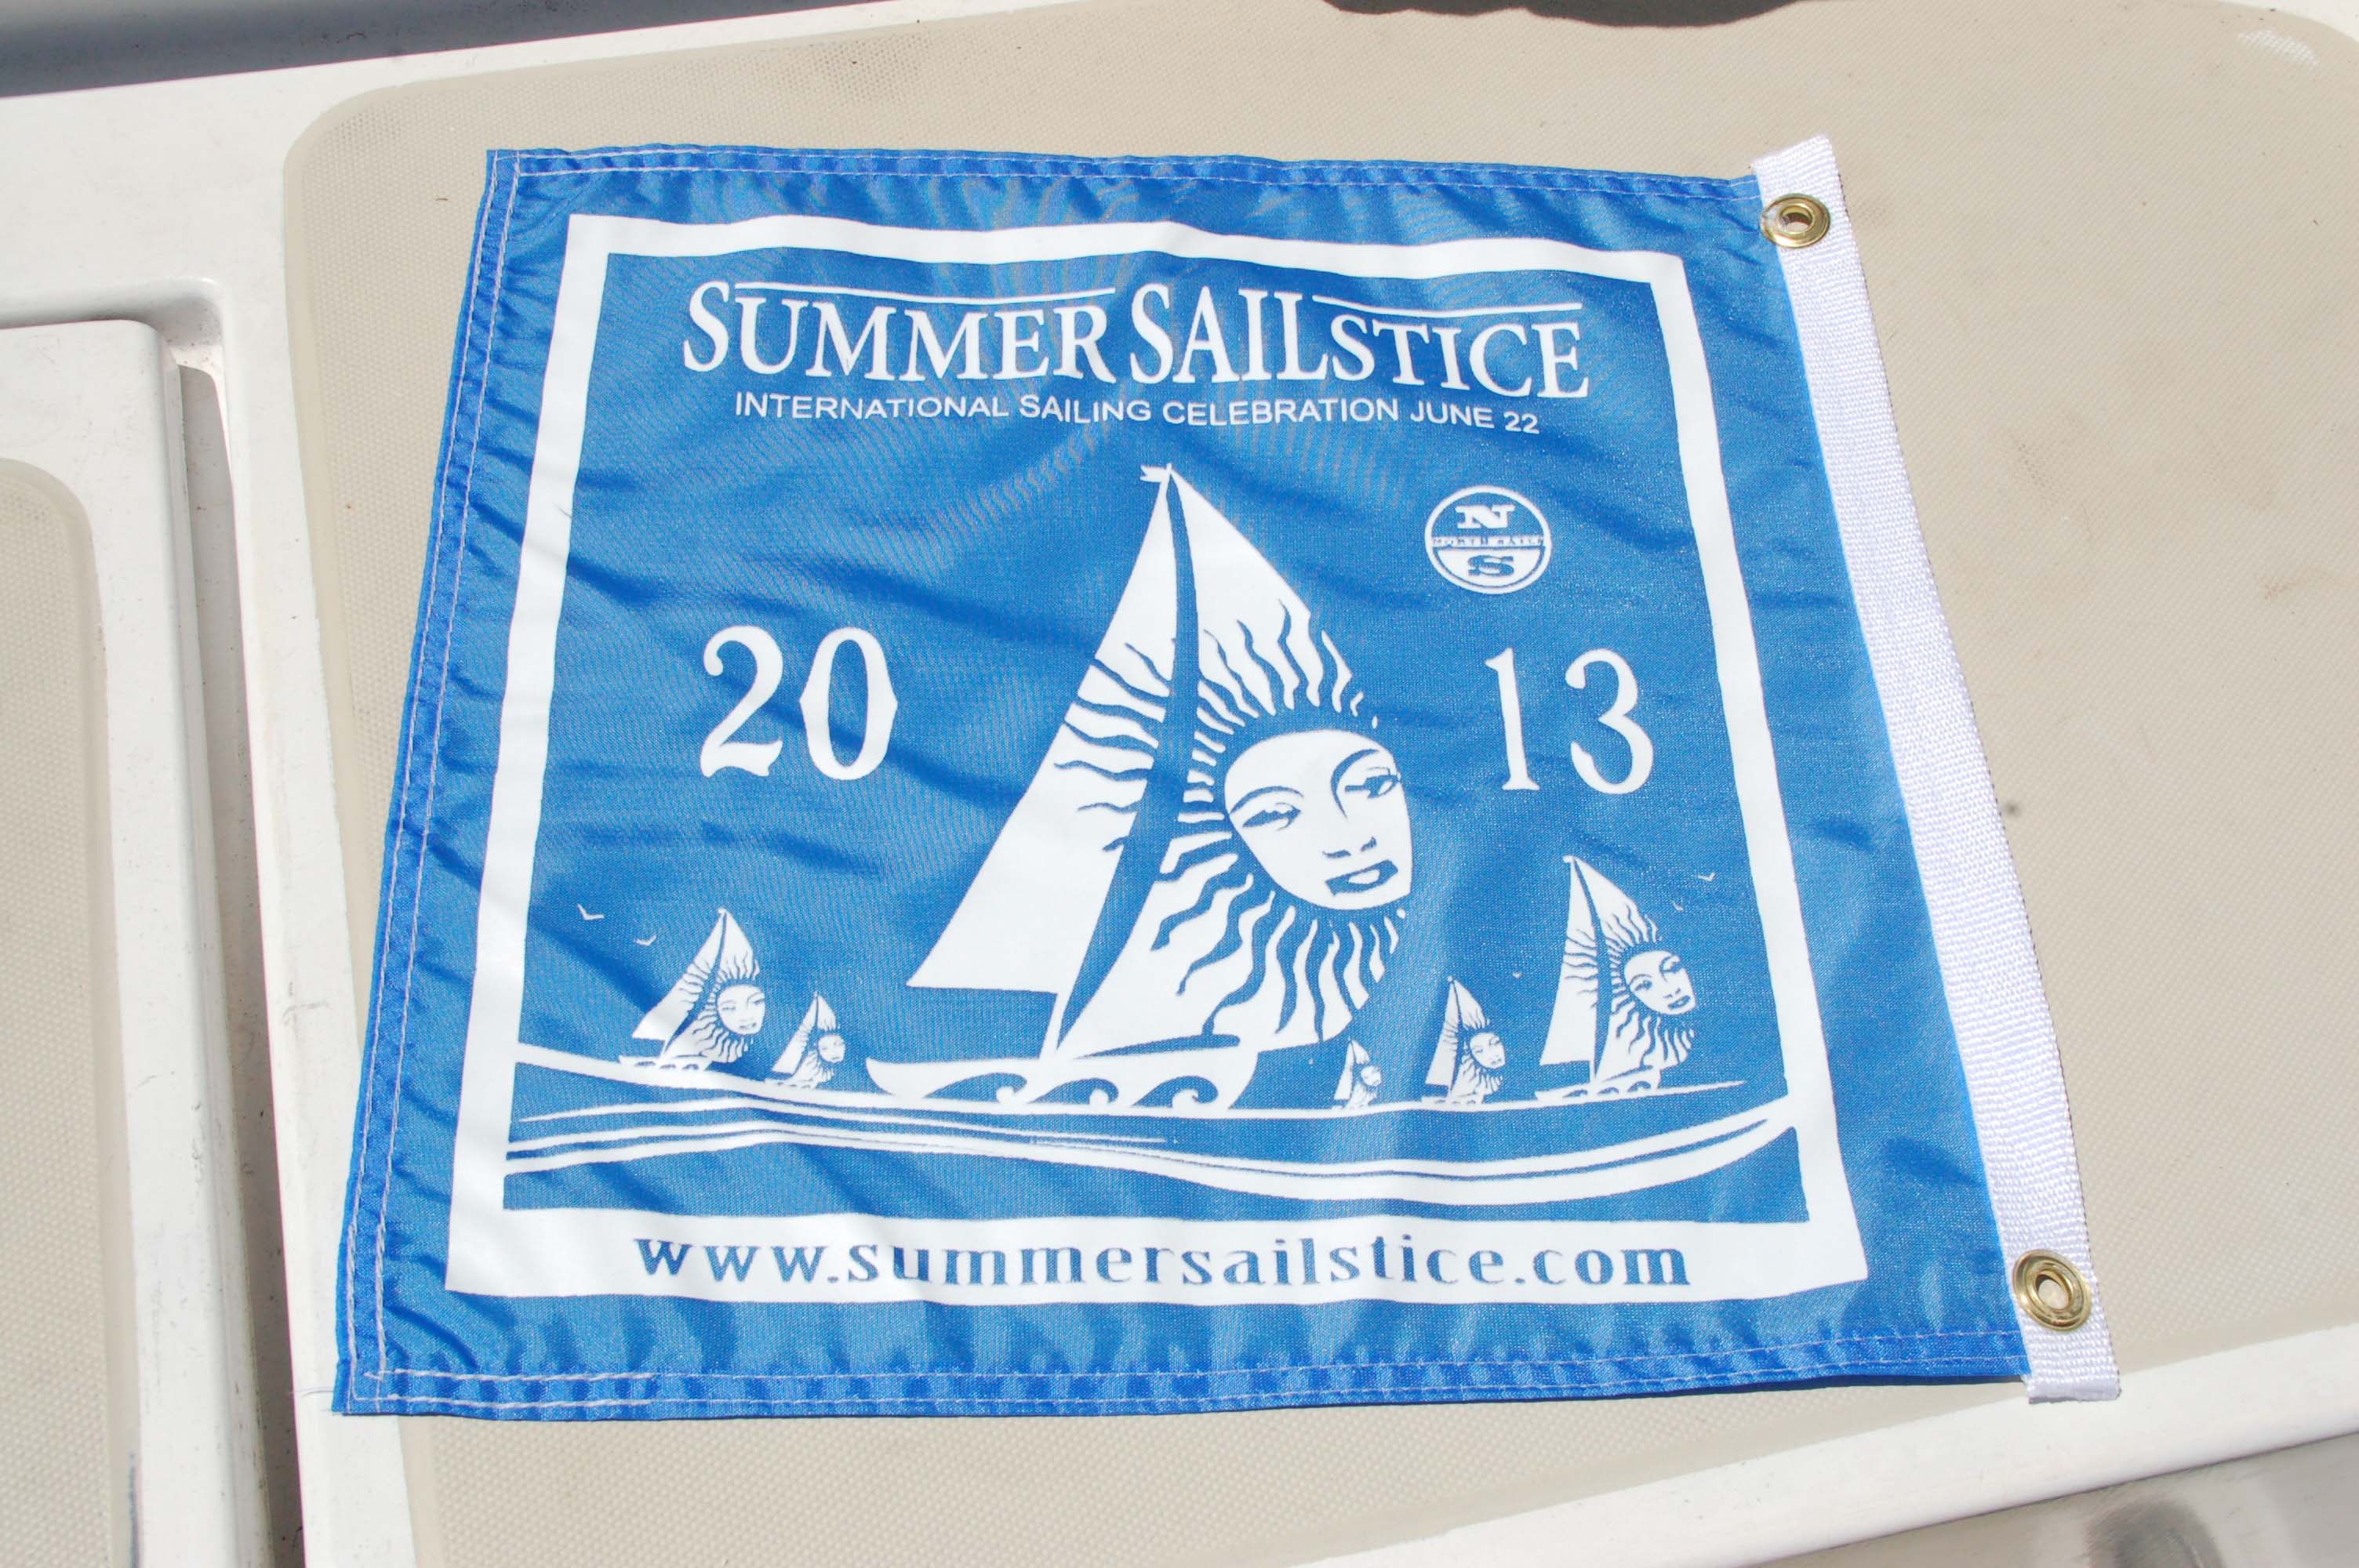 Winners of burgee, Boat US membership and magazine subscription to Blue Water sailing